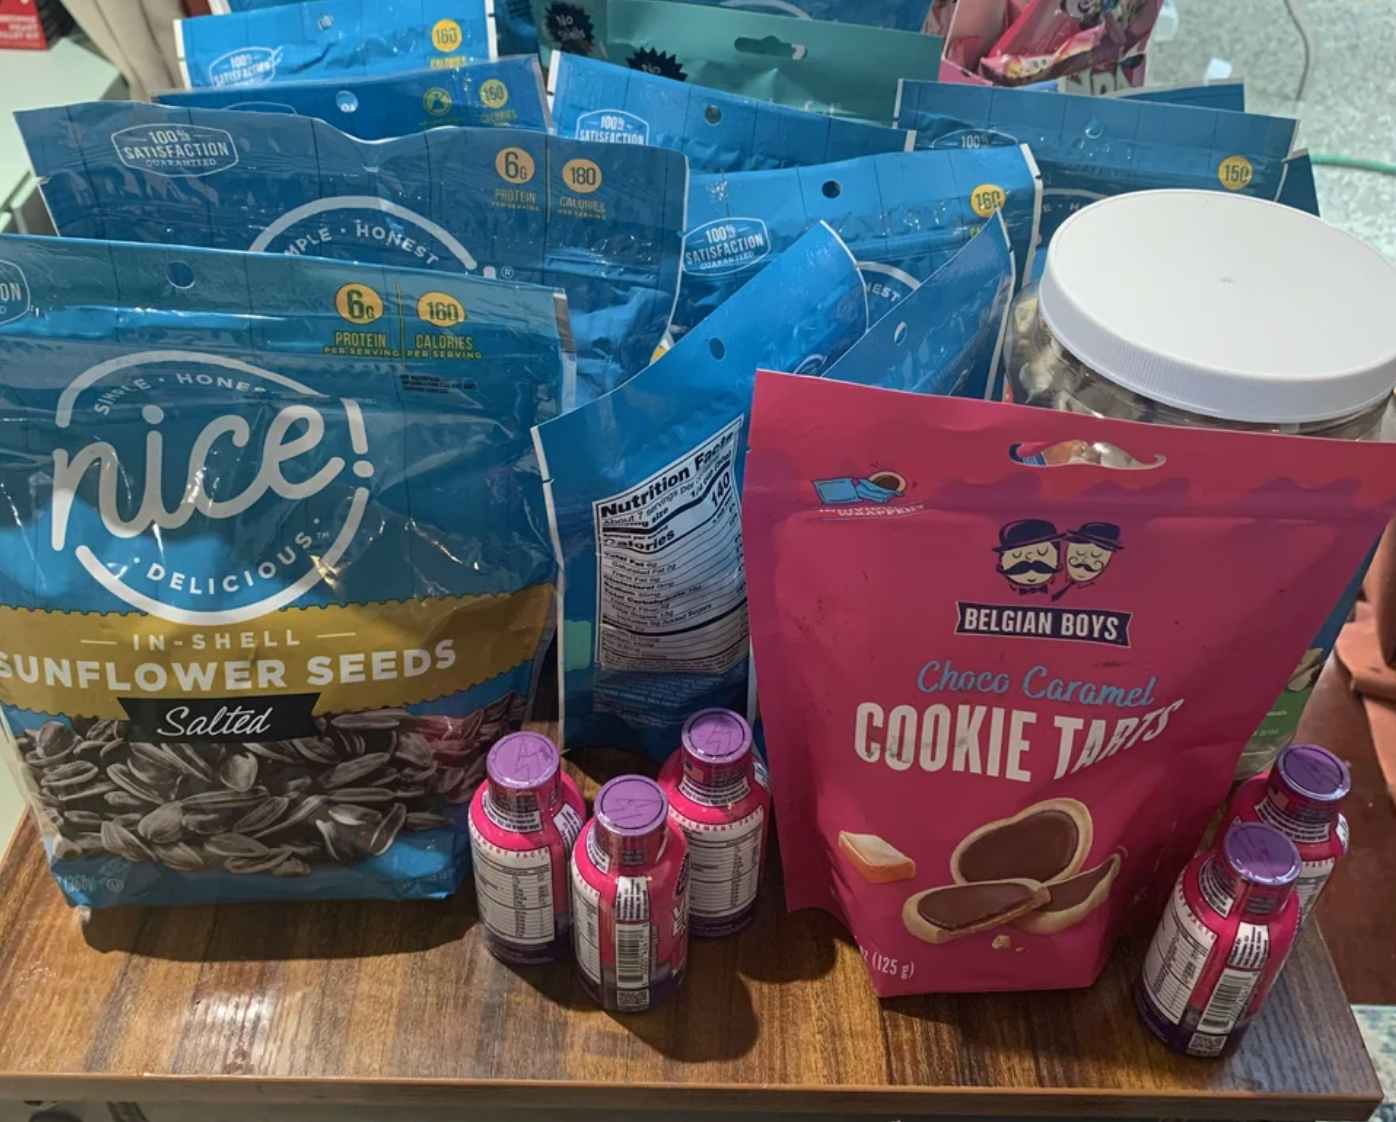 Seeds, cookies and energy supplements salvaged from a Walgreens dumpster